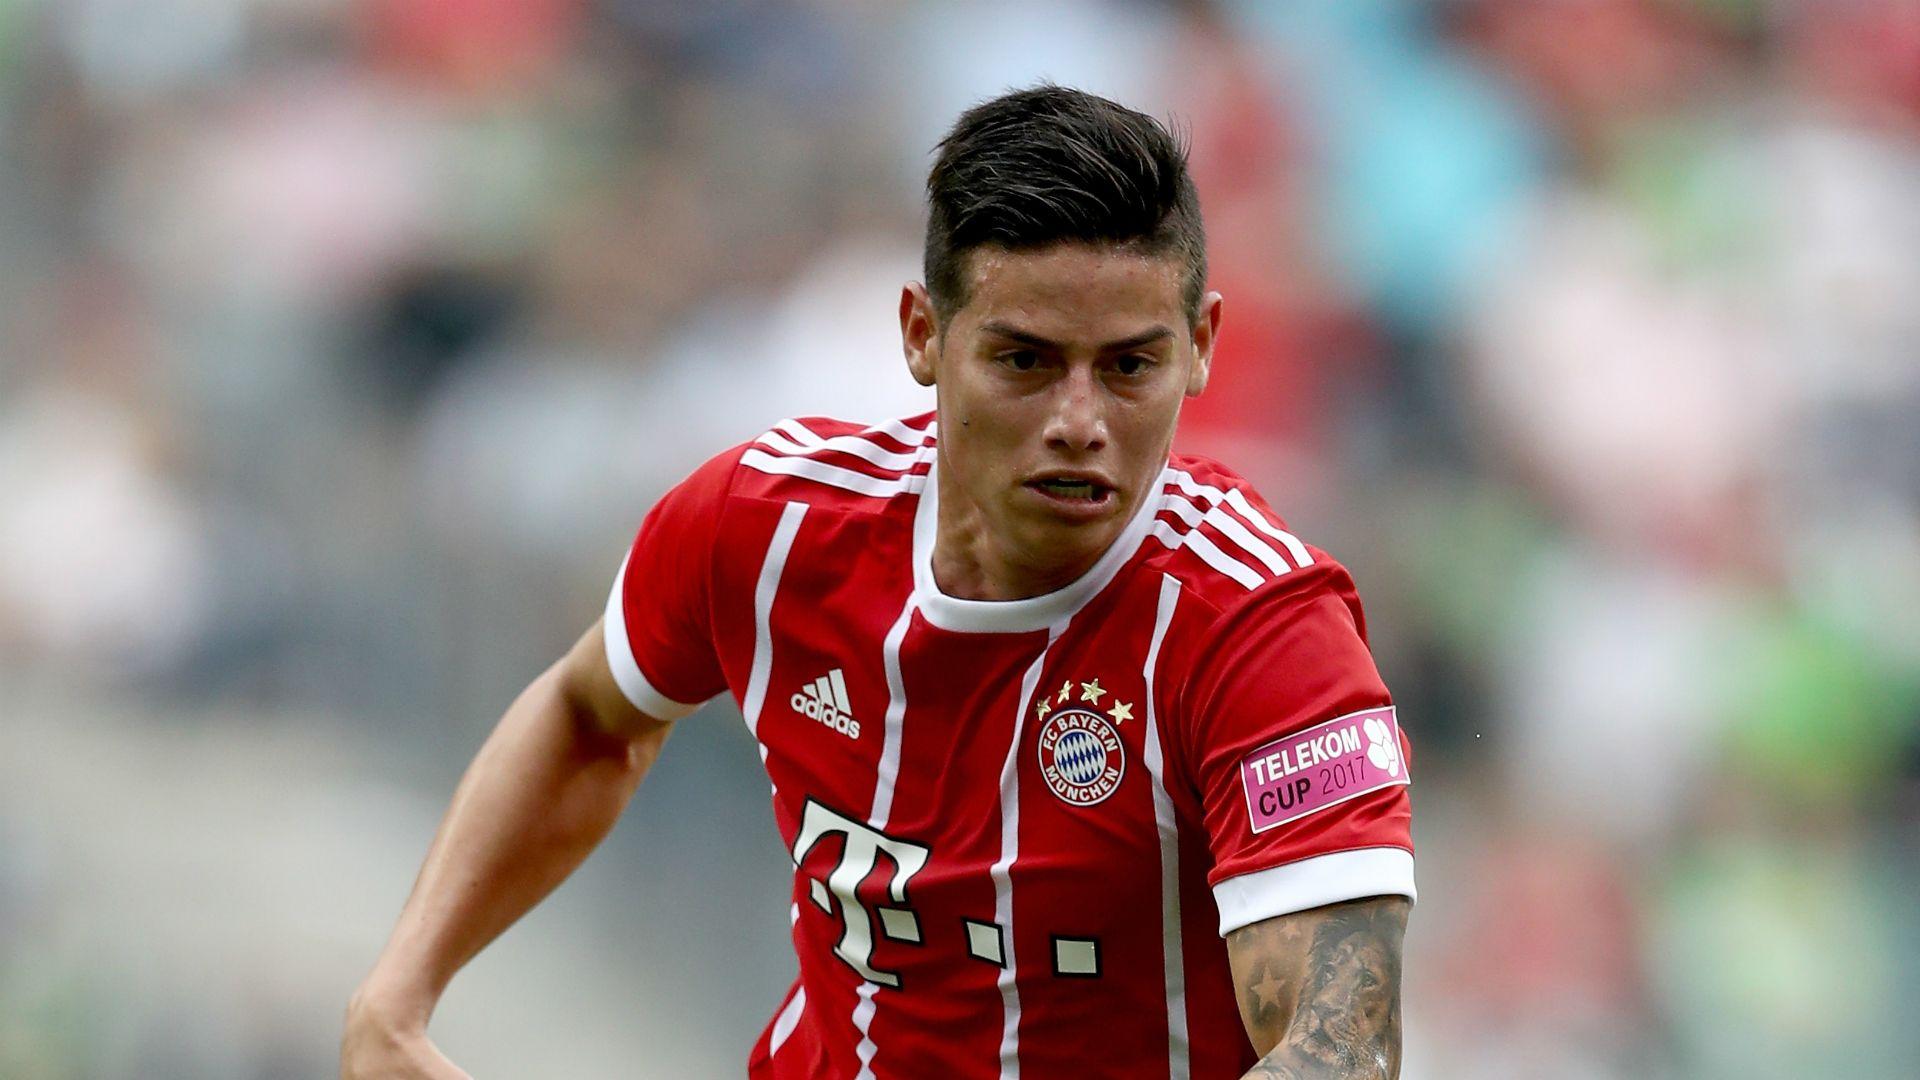 Bundesliga news: James Rodriguez 'really happy' after swapping Real